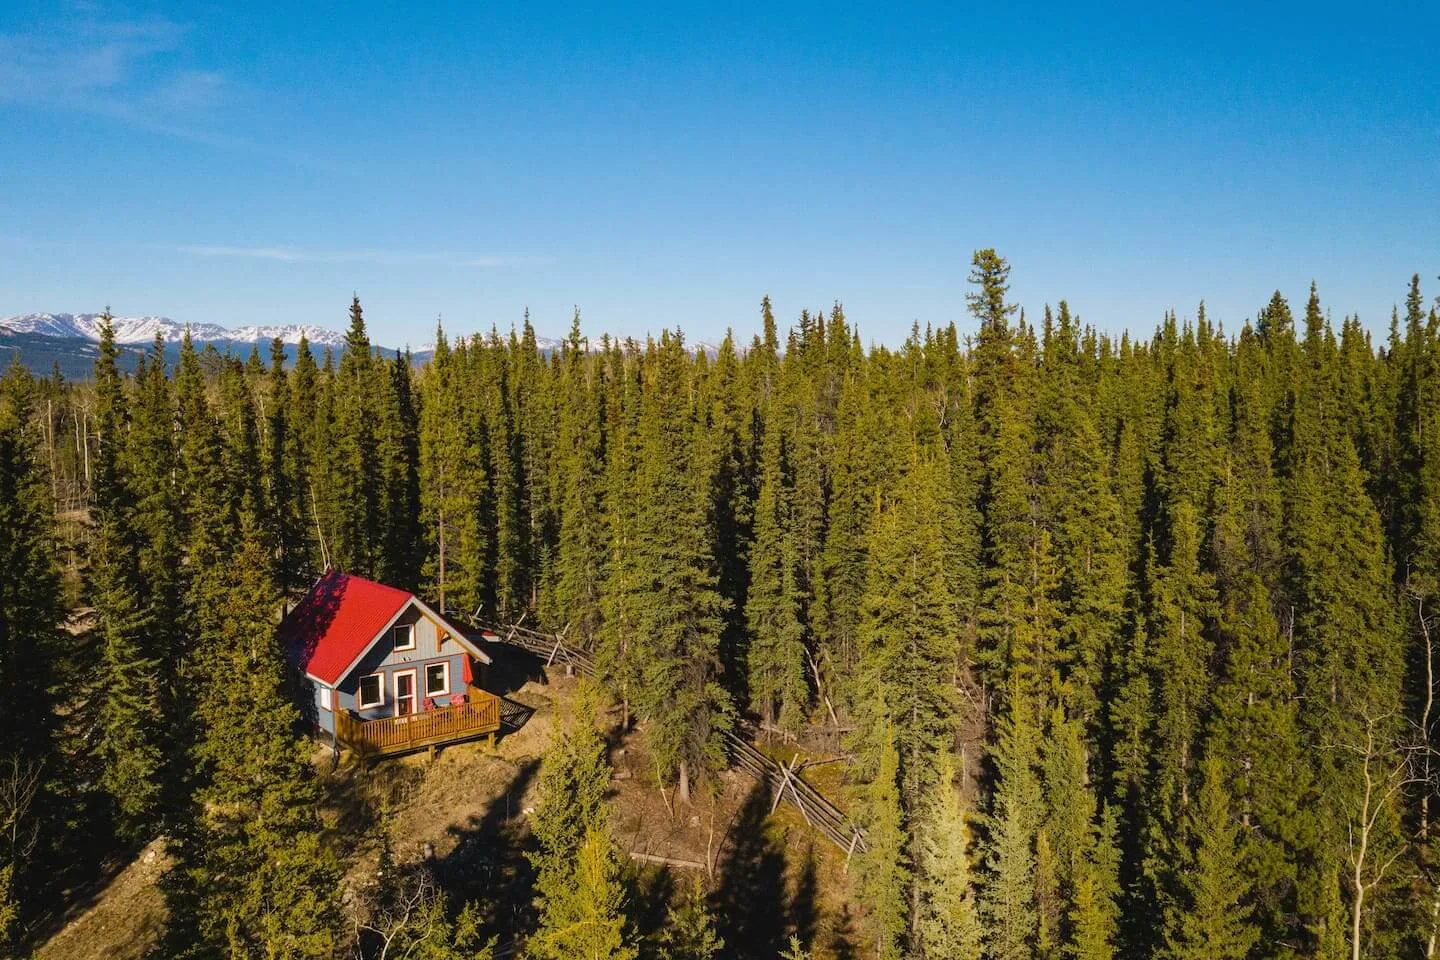 Places to stay in whitehorse